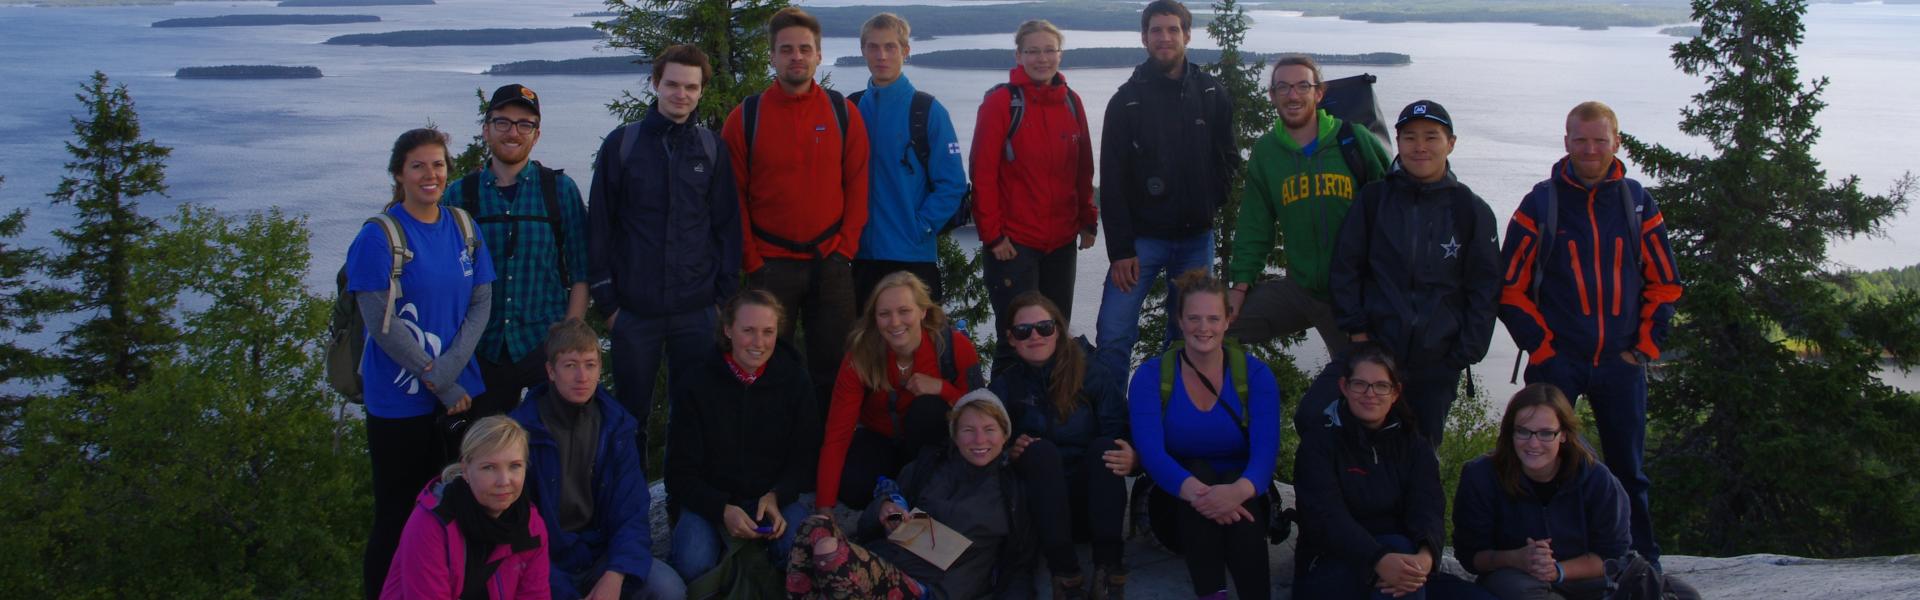 UBC Faculty of Forestry dual master’s program students on a field course in Finland in 2013